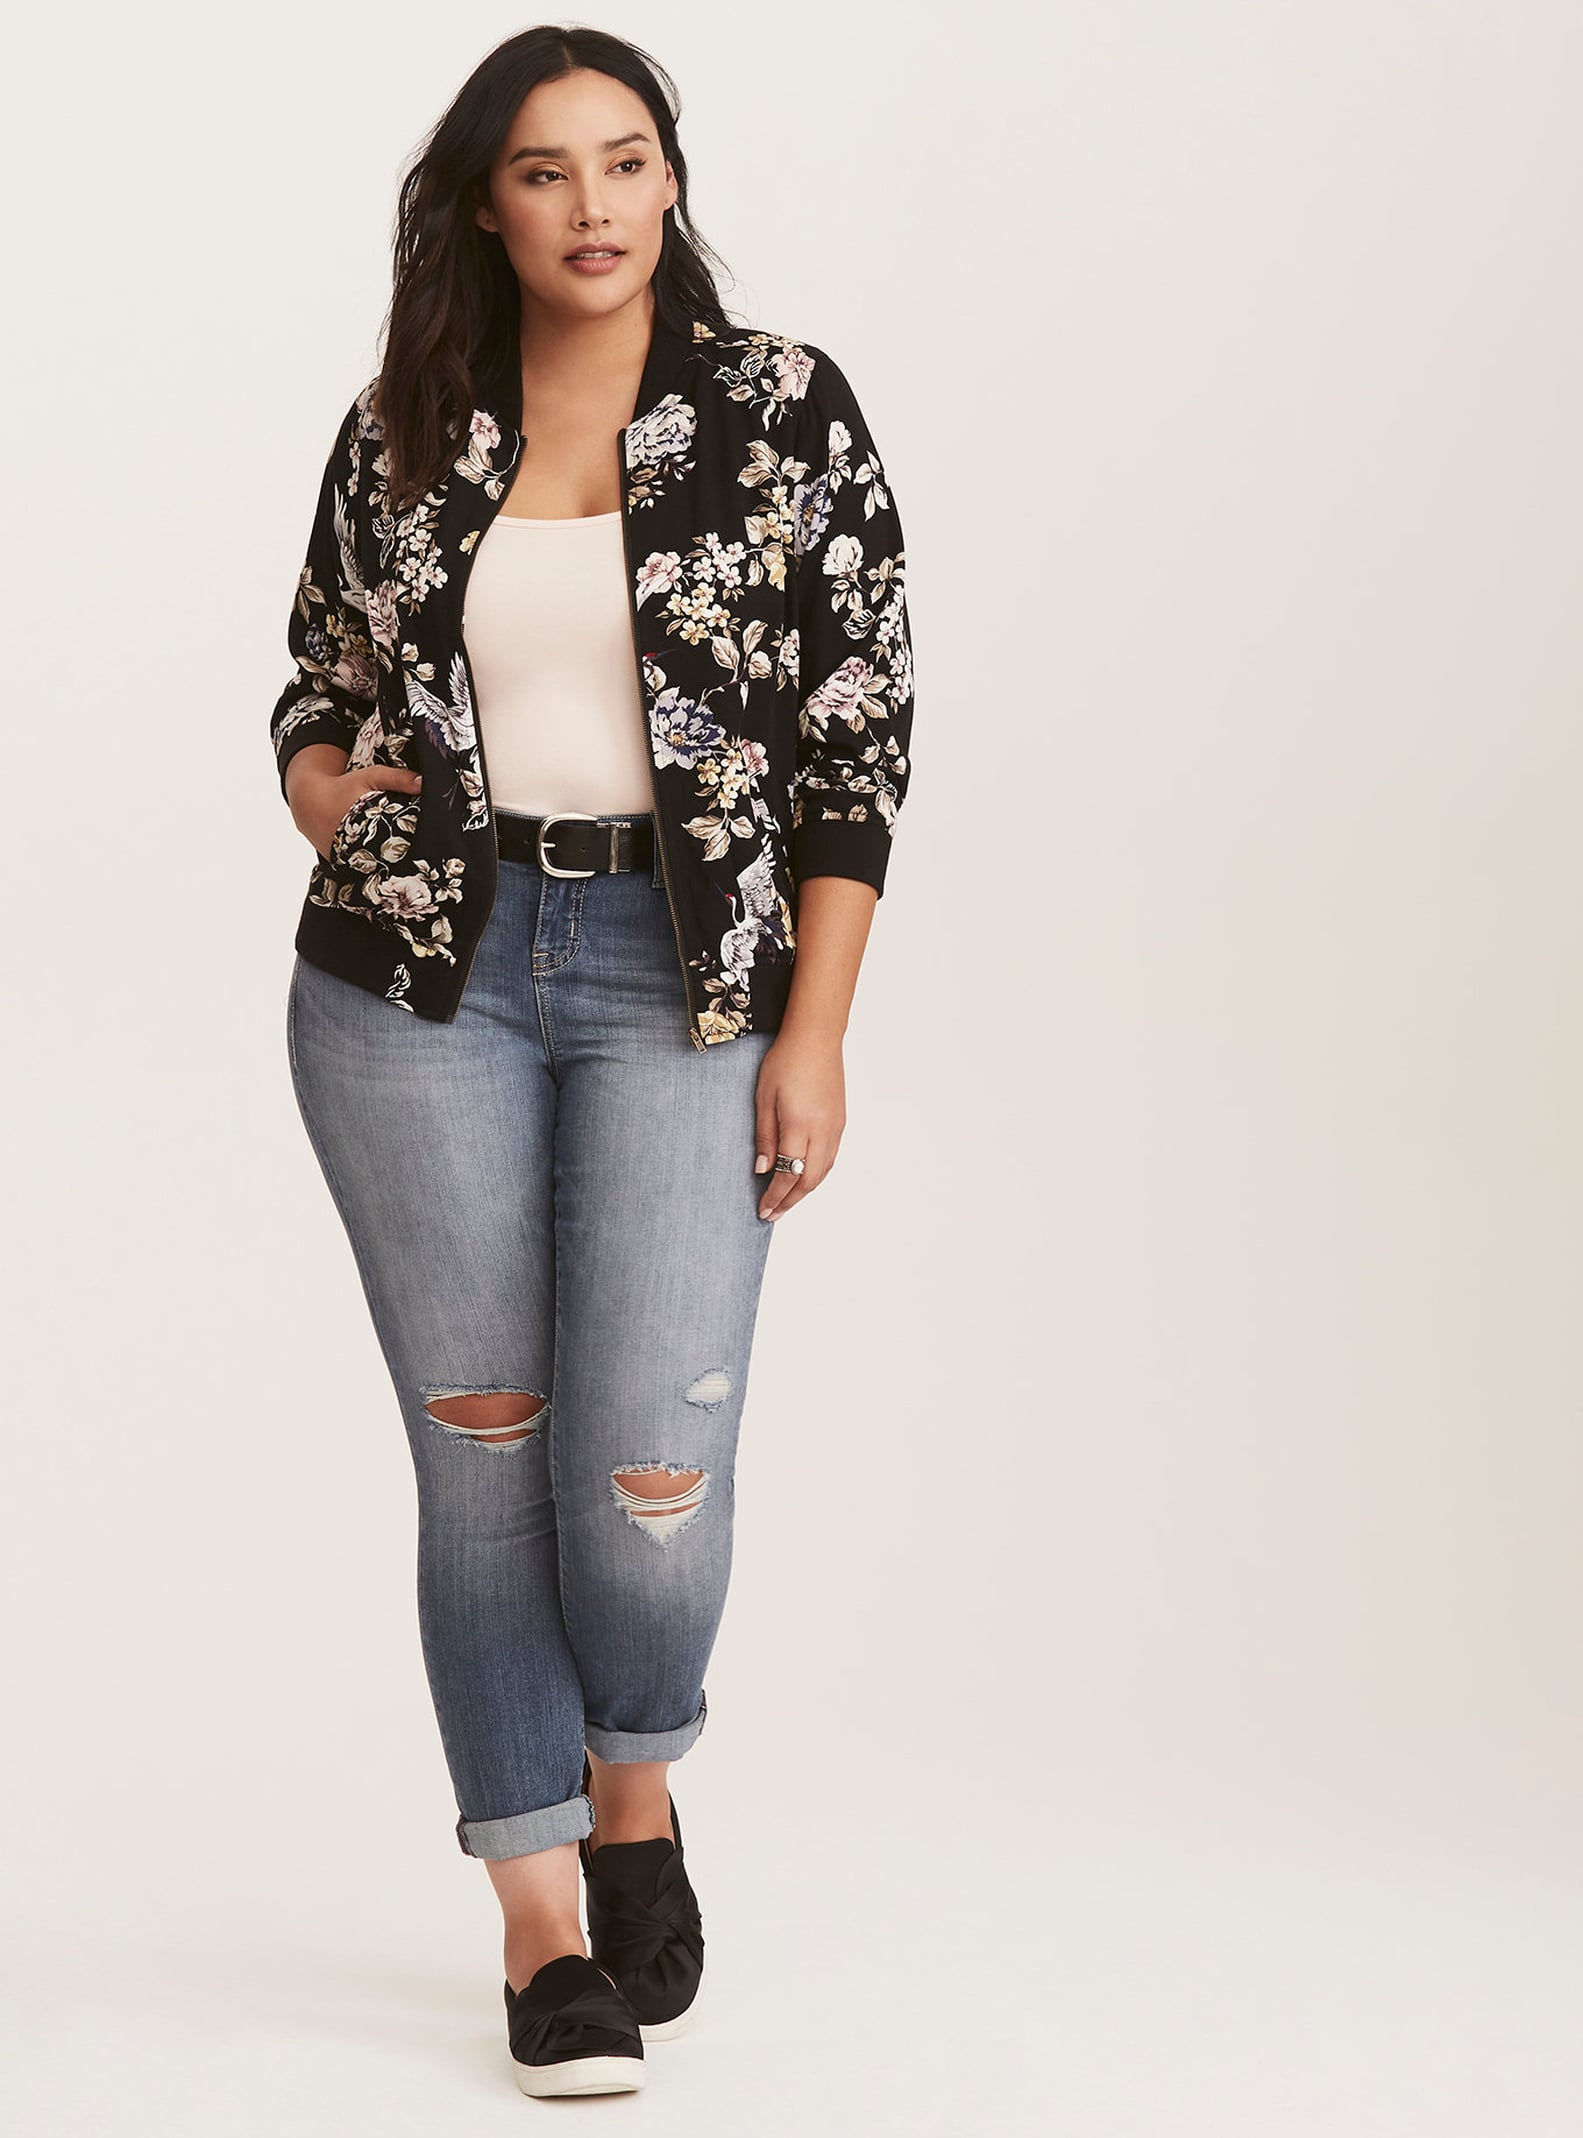 What Jacket to Wear For Spring | POPSUGAR Fashion